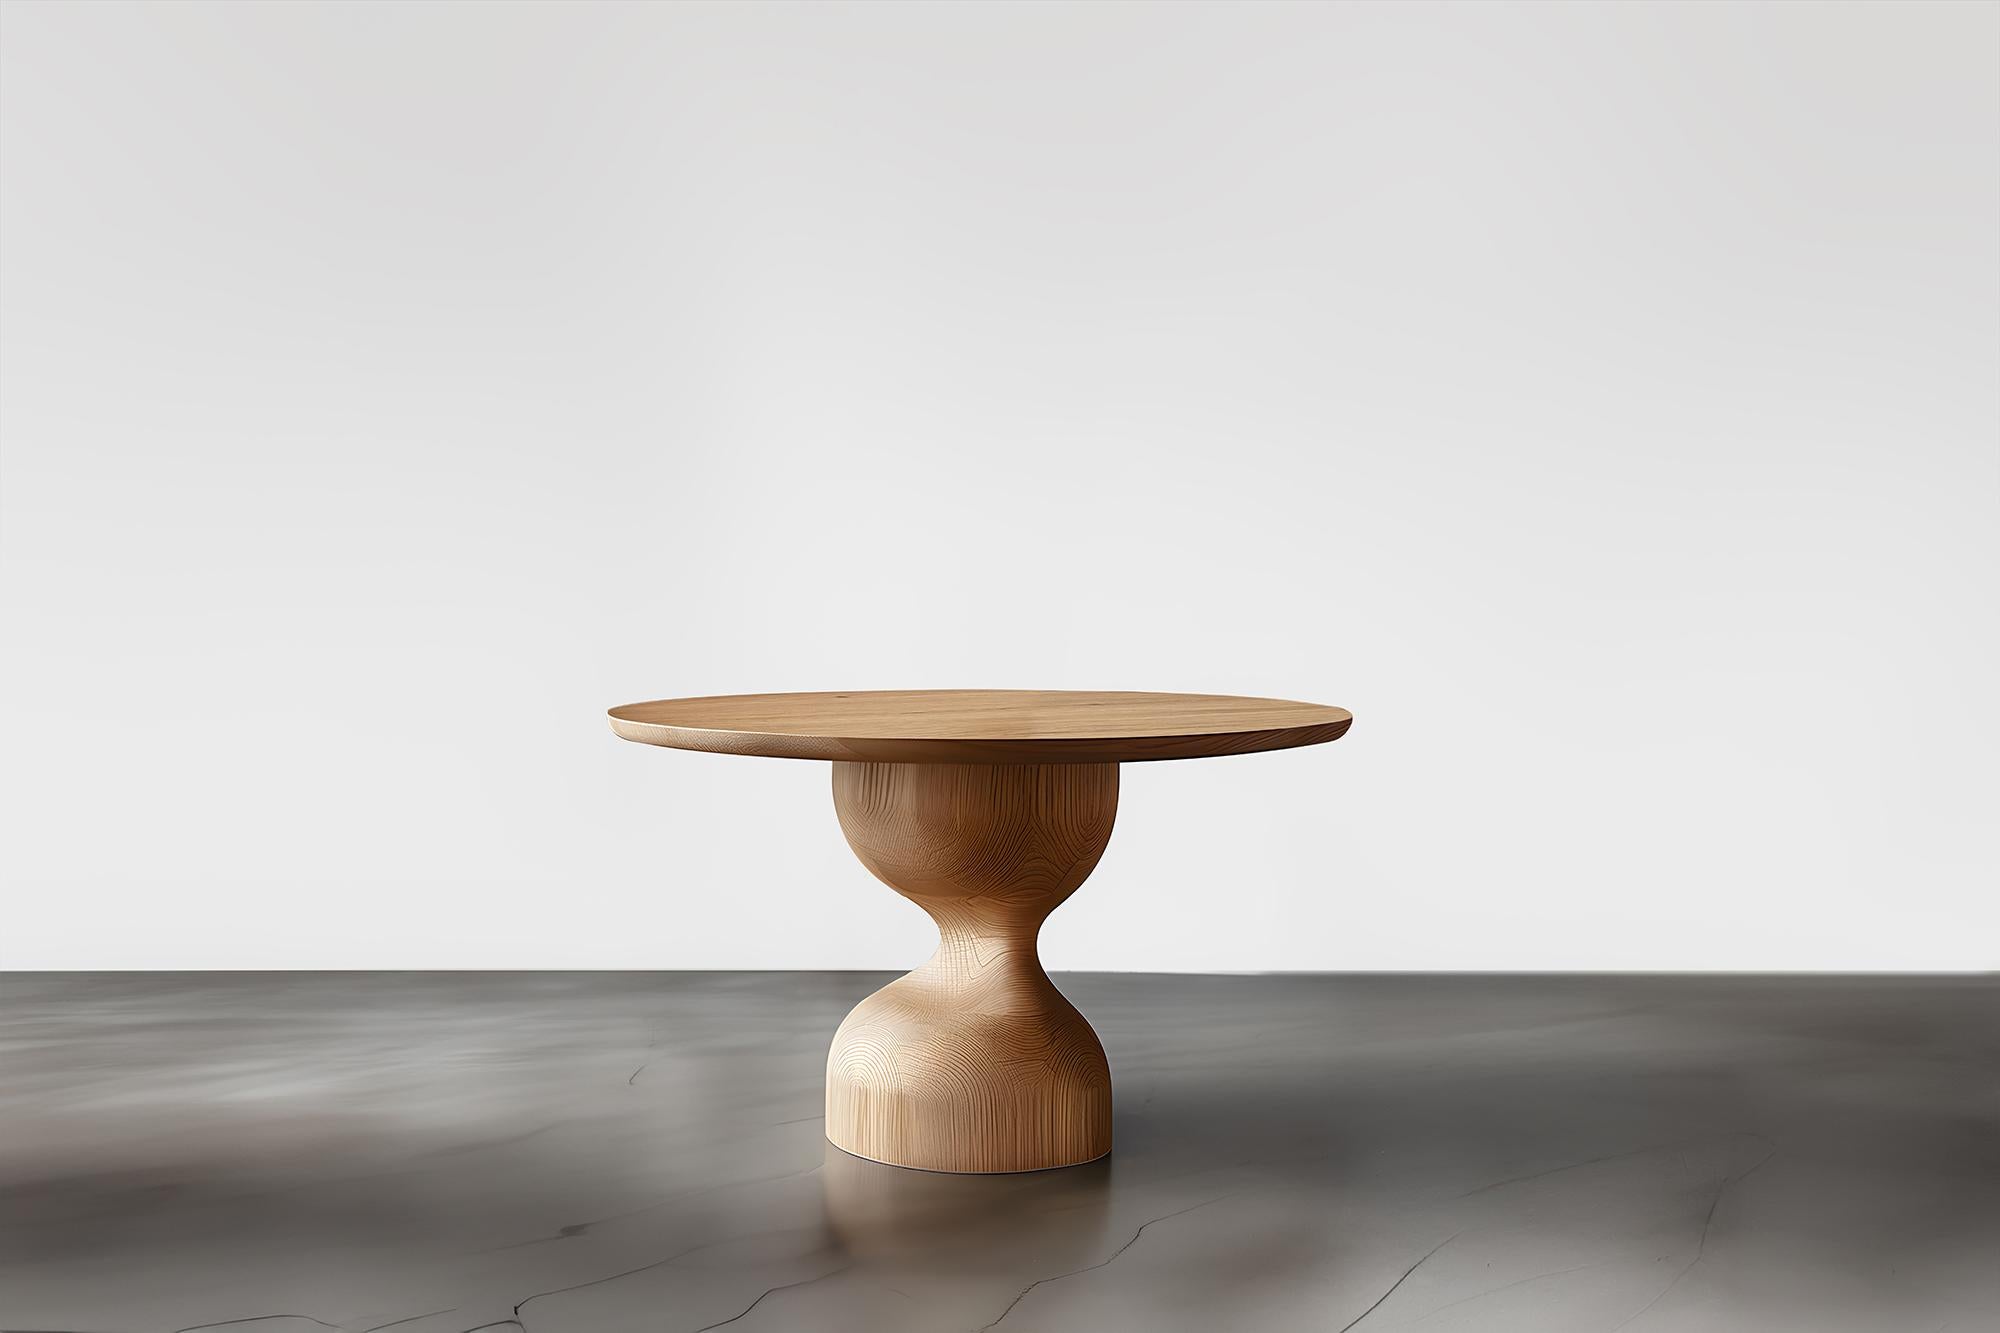 Card and Tea Tables No20, Elegance in Wood by Socle Series NONO

——

Introducing the 